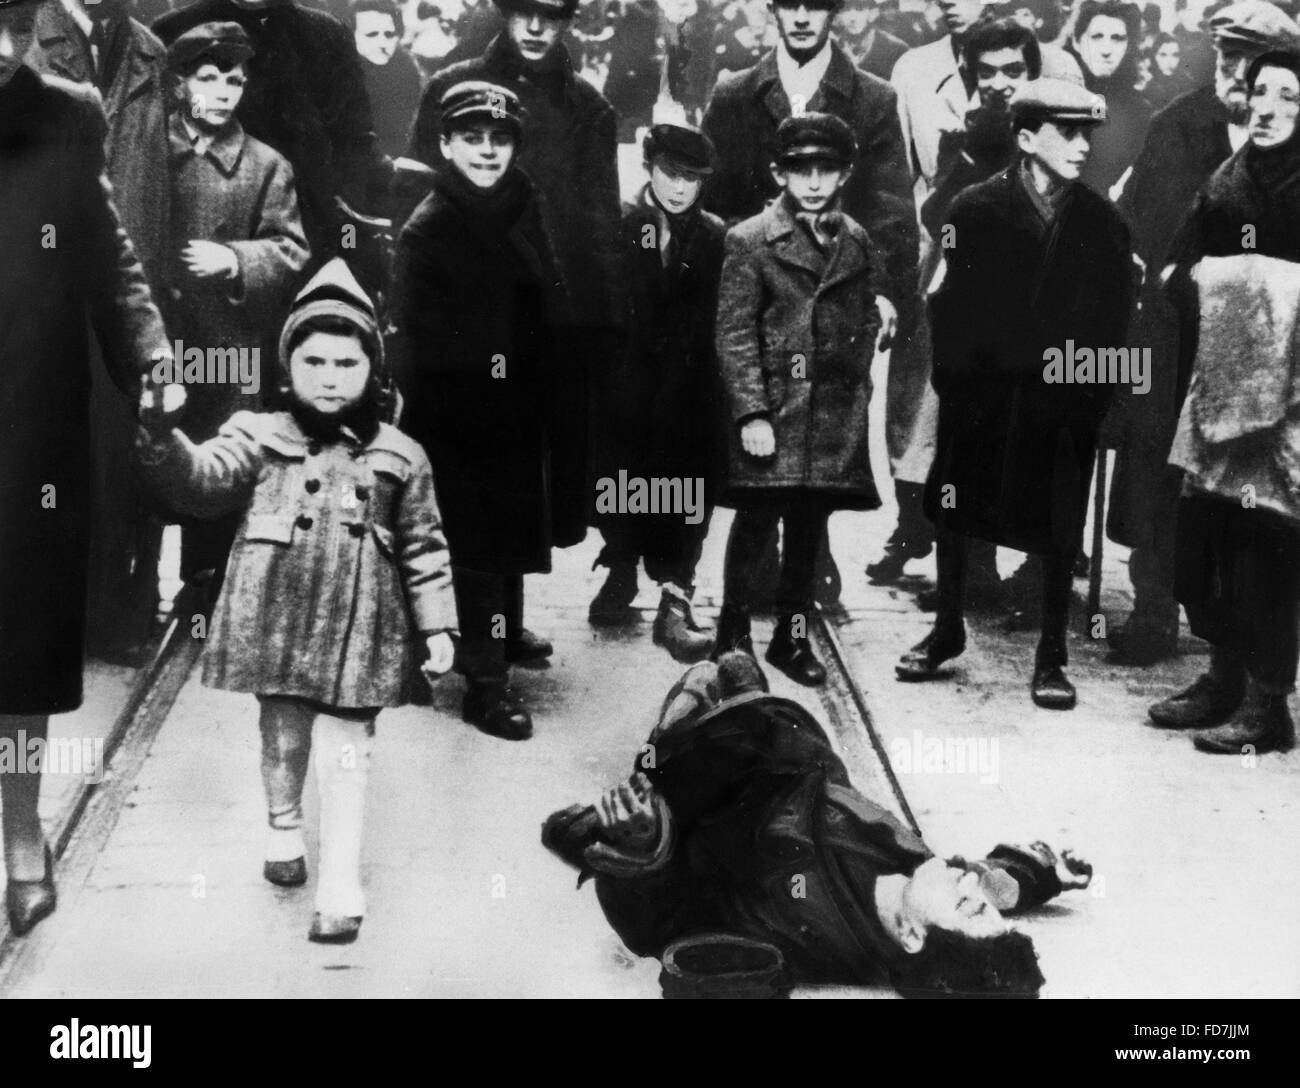 A collapsed person in the Warsaw Ghetto Stock Photo